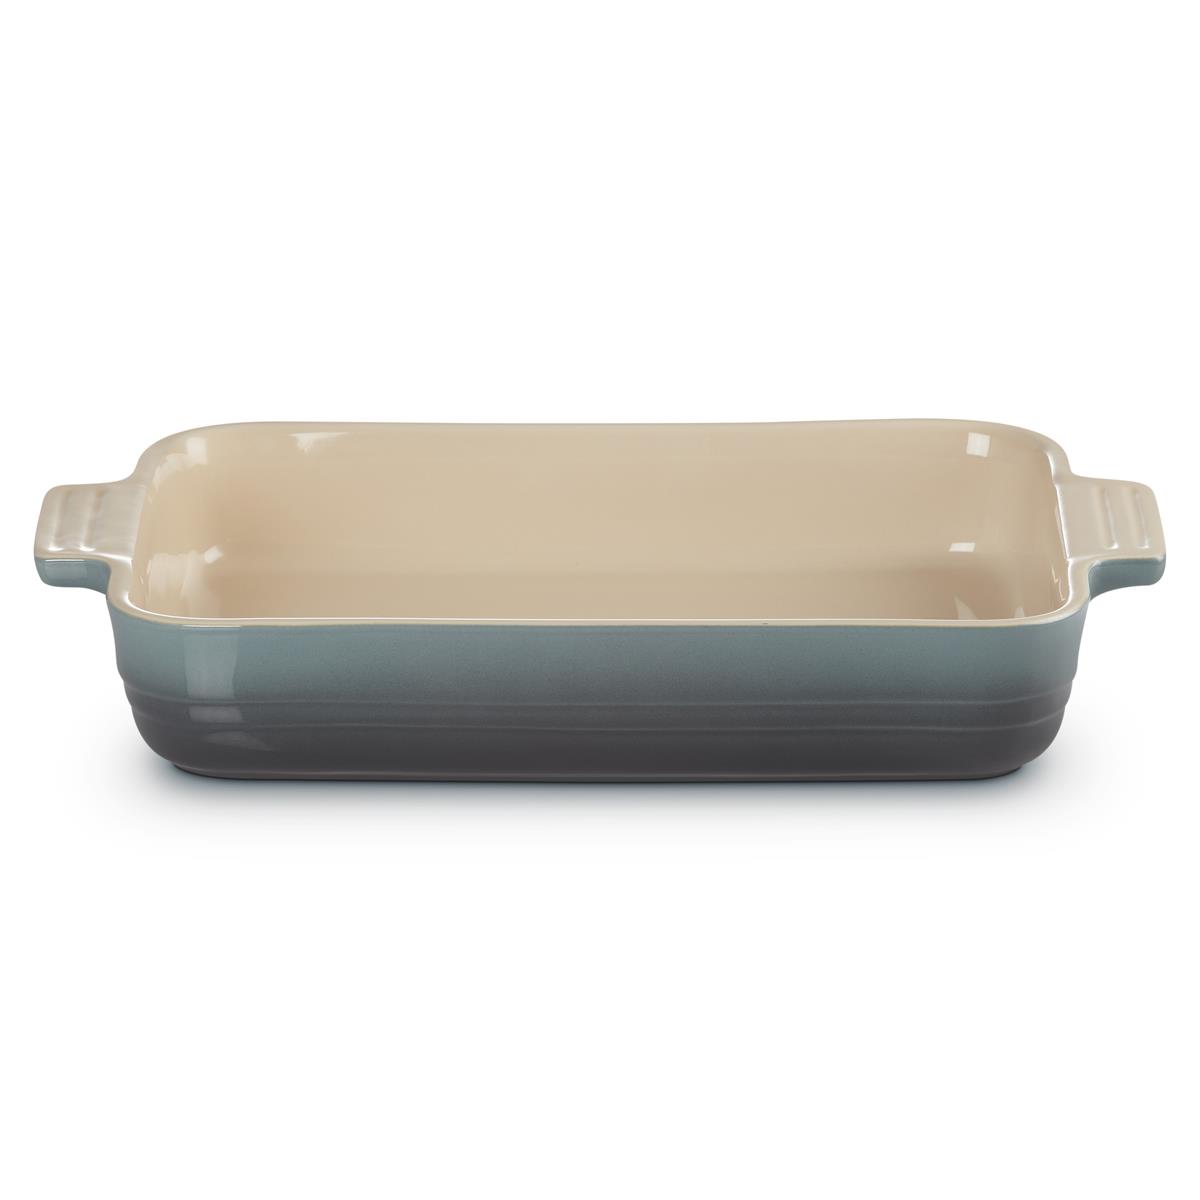 Are the handles included in the 32cm width of the Le Creuset Rectangular Dish?